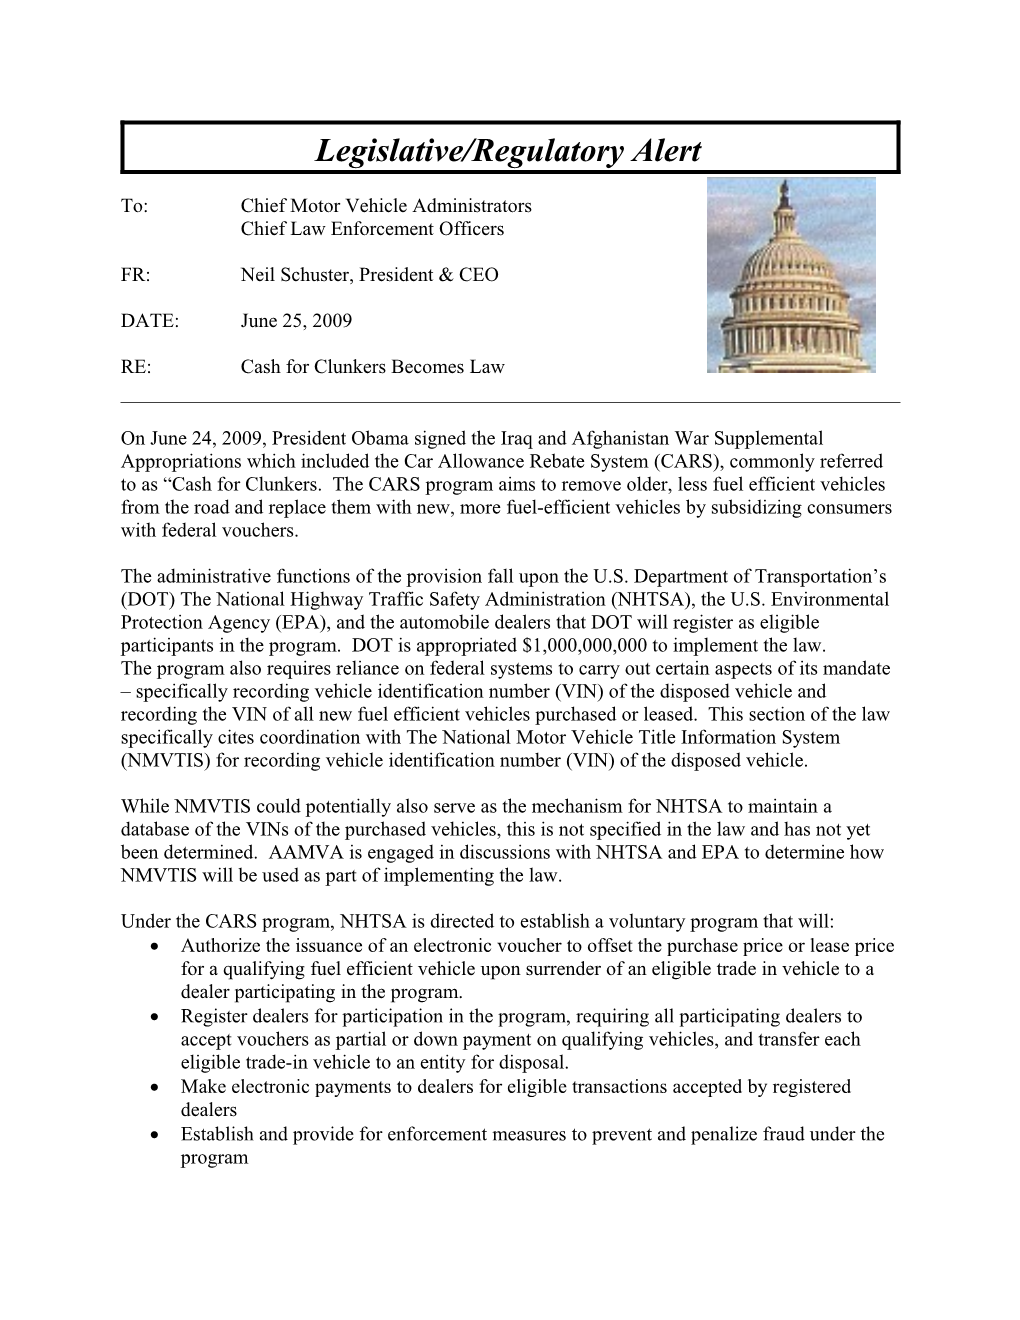 HR 2751 the Consumer Assistance to Recycle and Save Act